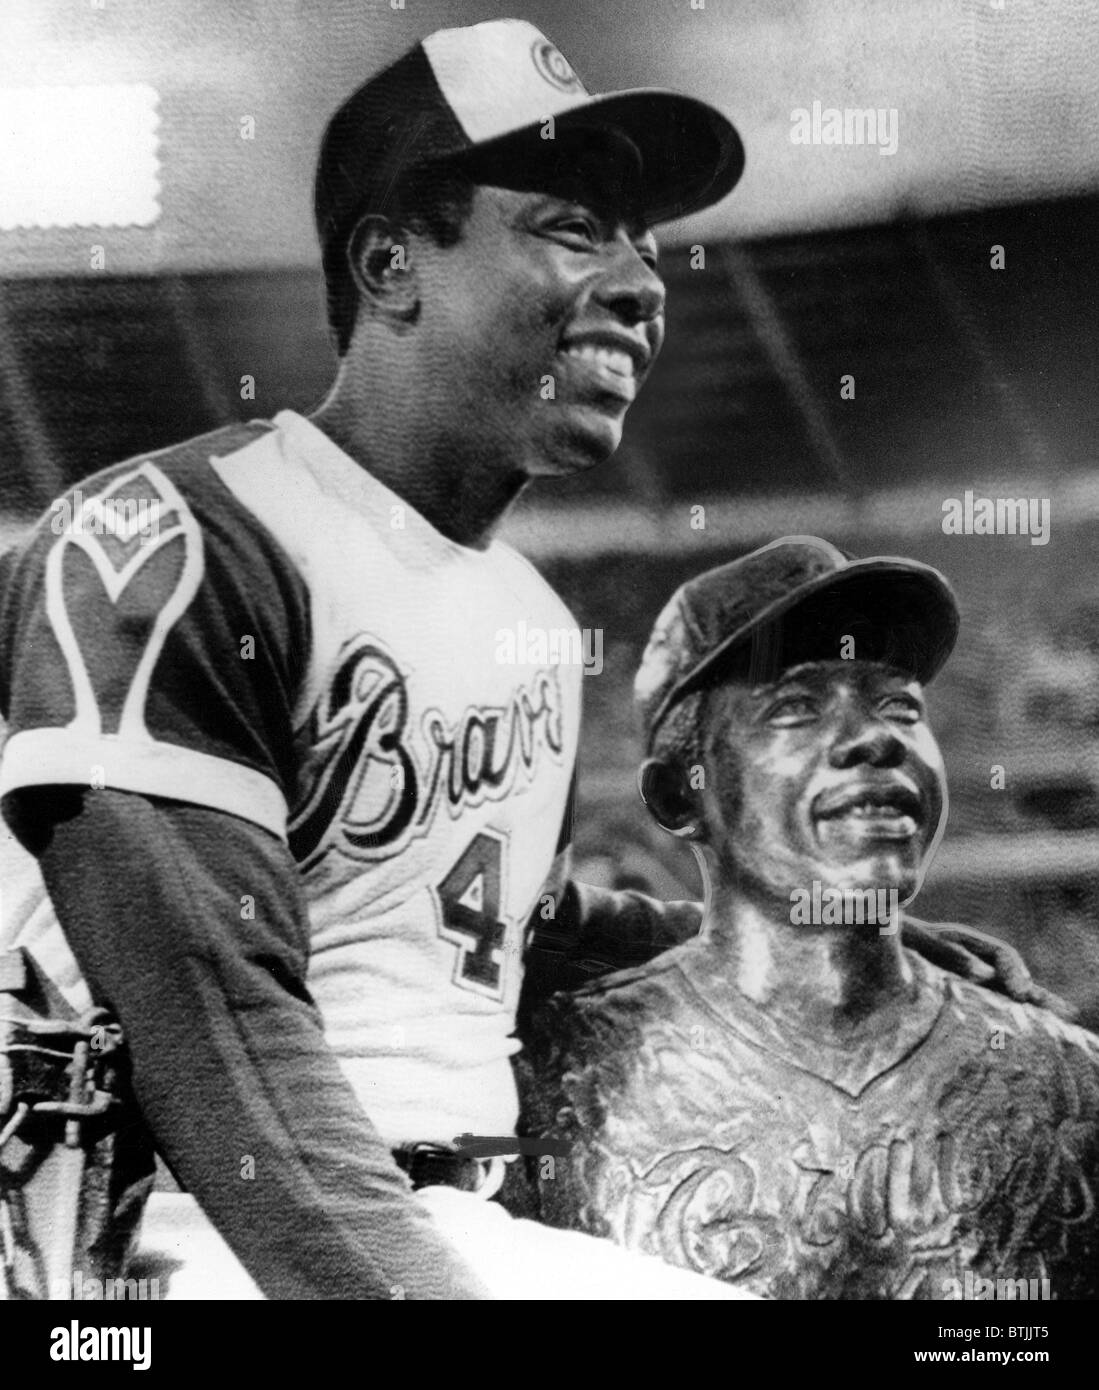 Hank Aaron poses with bust of himself on eve of breaking Babe Ruth's career home run record of 714. Atlanta, GA, 04-08-1974. Stock Photo